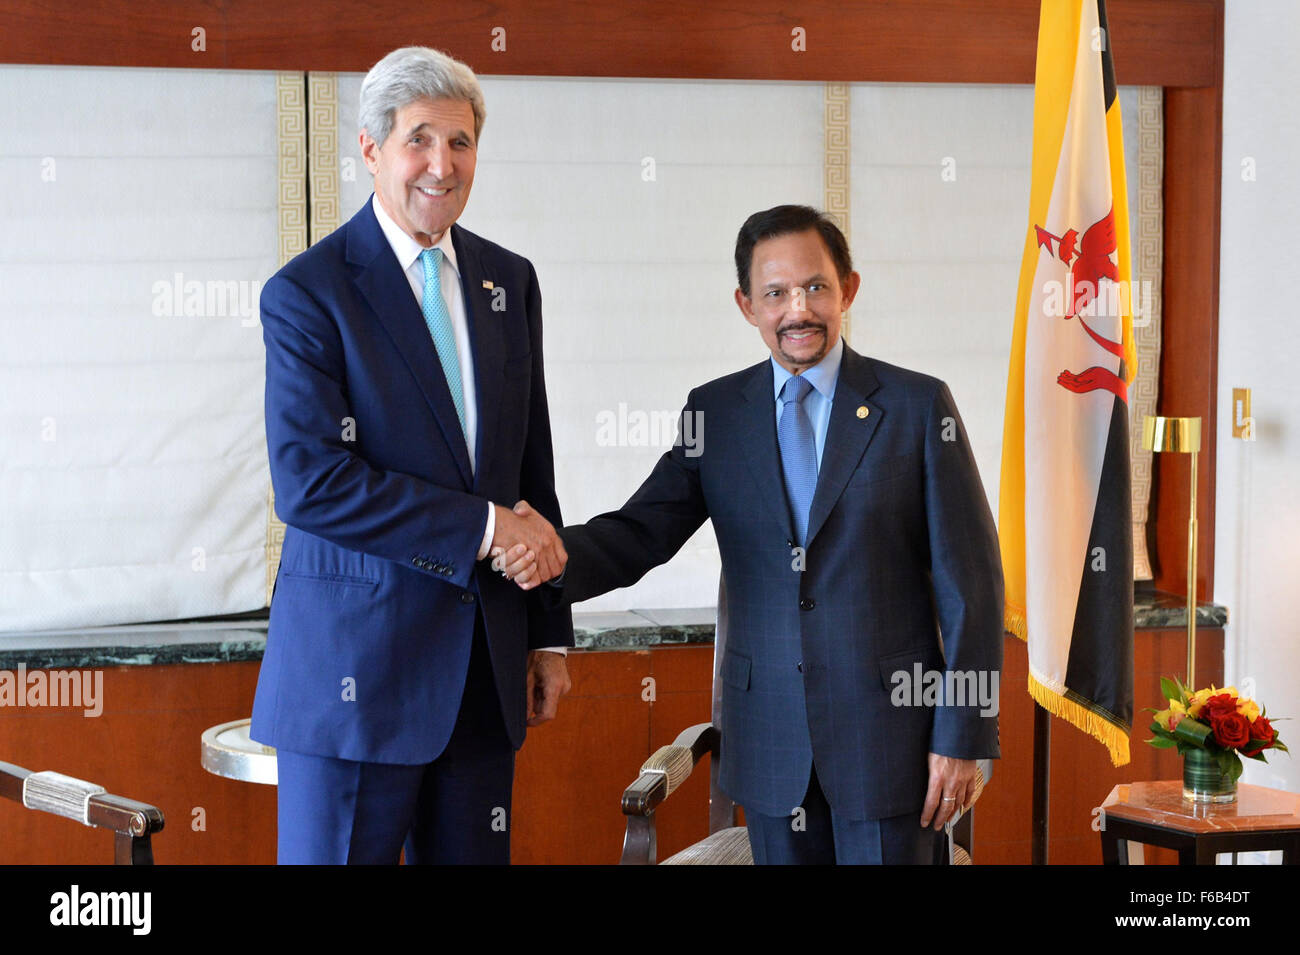 Secretary Kerry Poses for a Photo With Brunei Sultan Hassanal Bolkiah Before Their Meeting in New York City Stock Photo